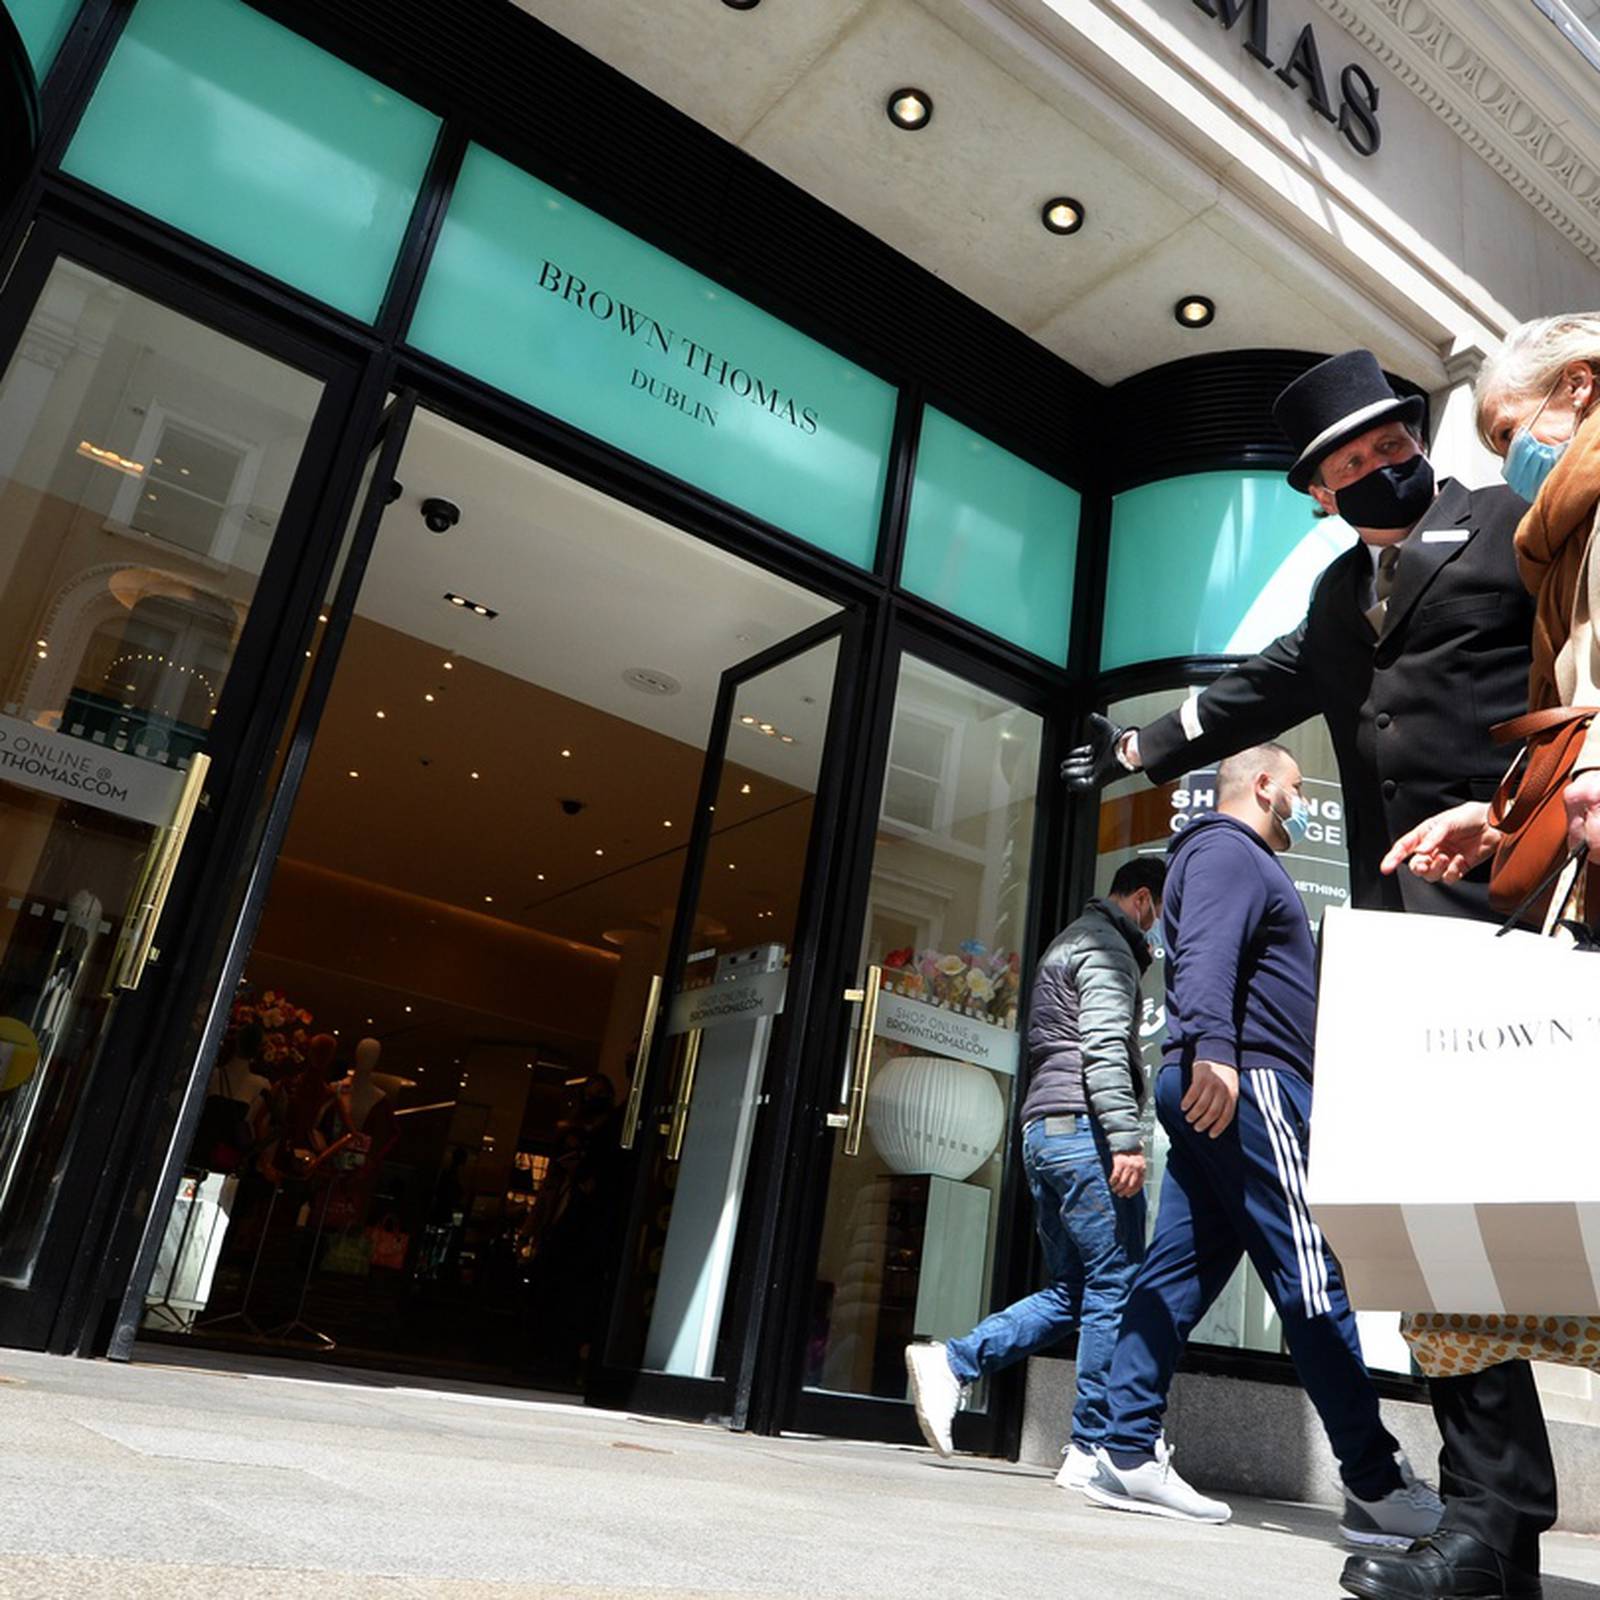 Brown Thomas and Arnotts to invest €50m in online and in-store